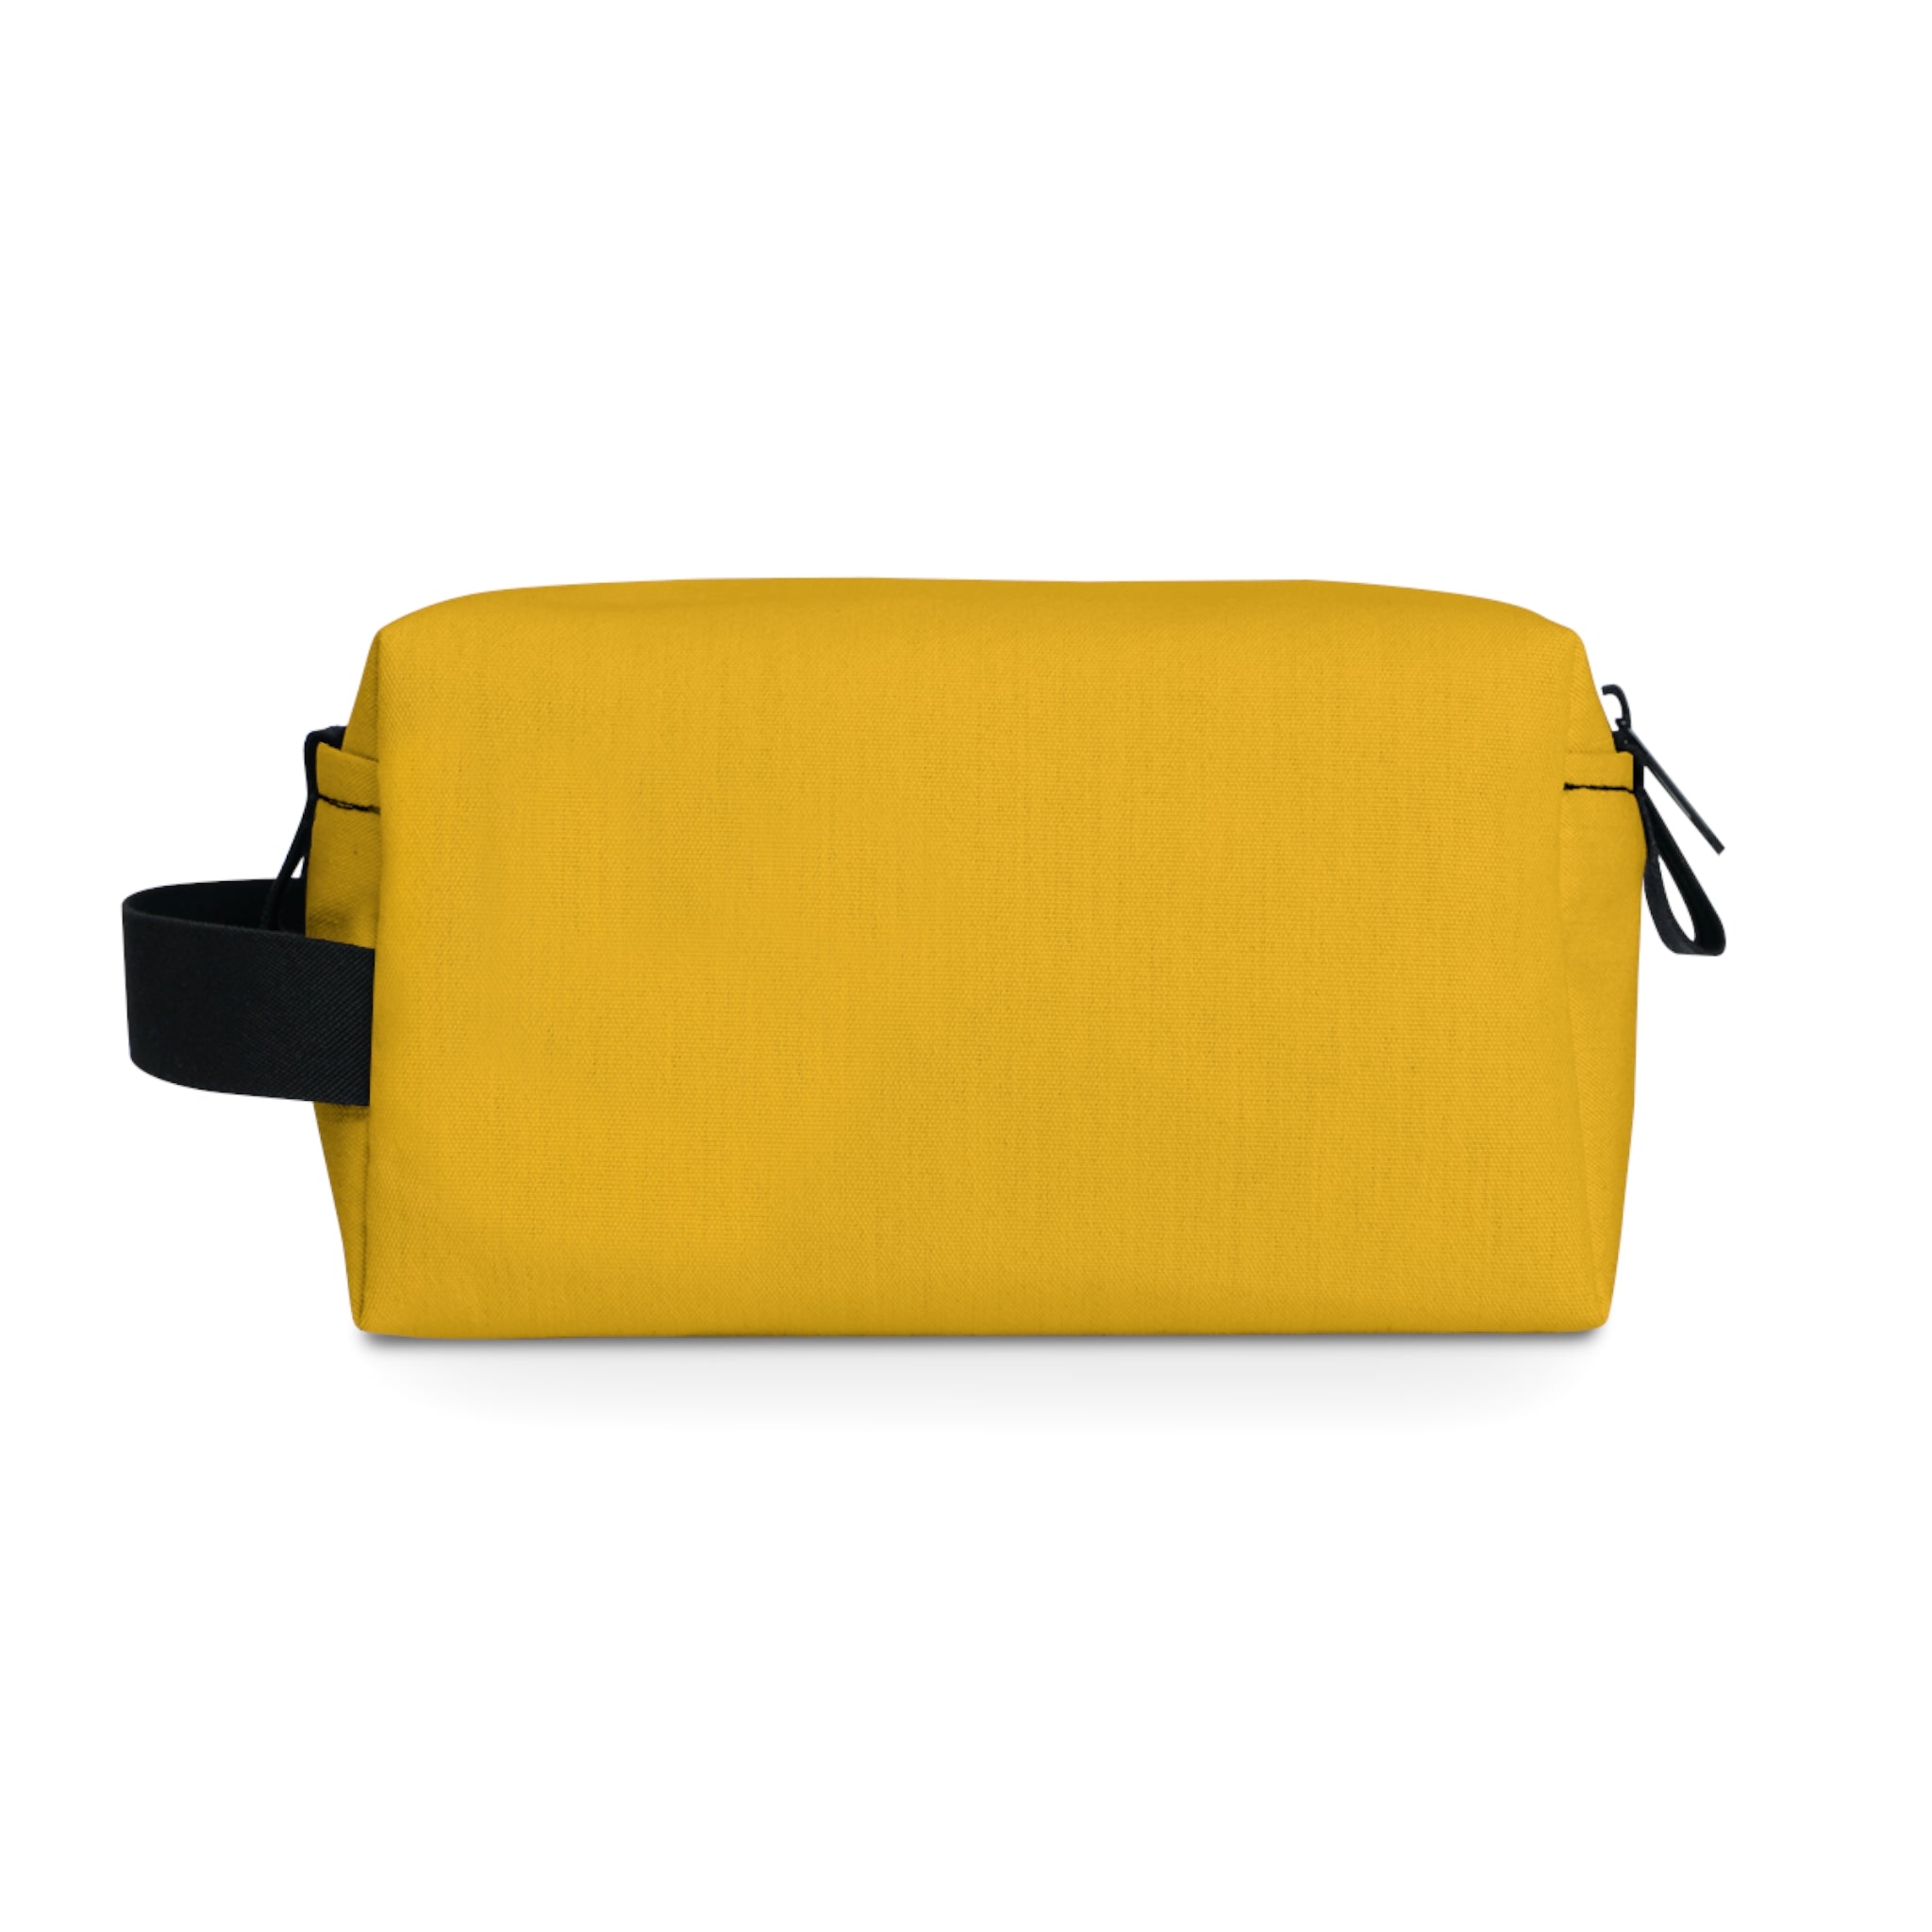 Essential stuff Toiletry Pouch (Yellow)